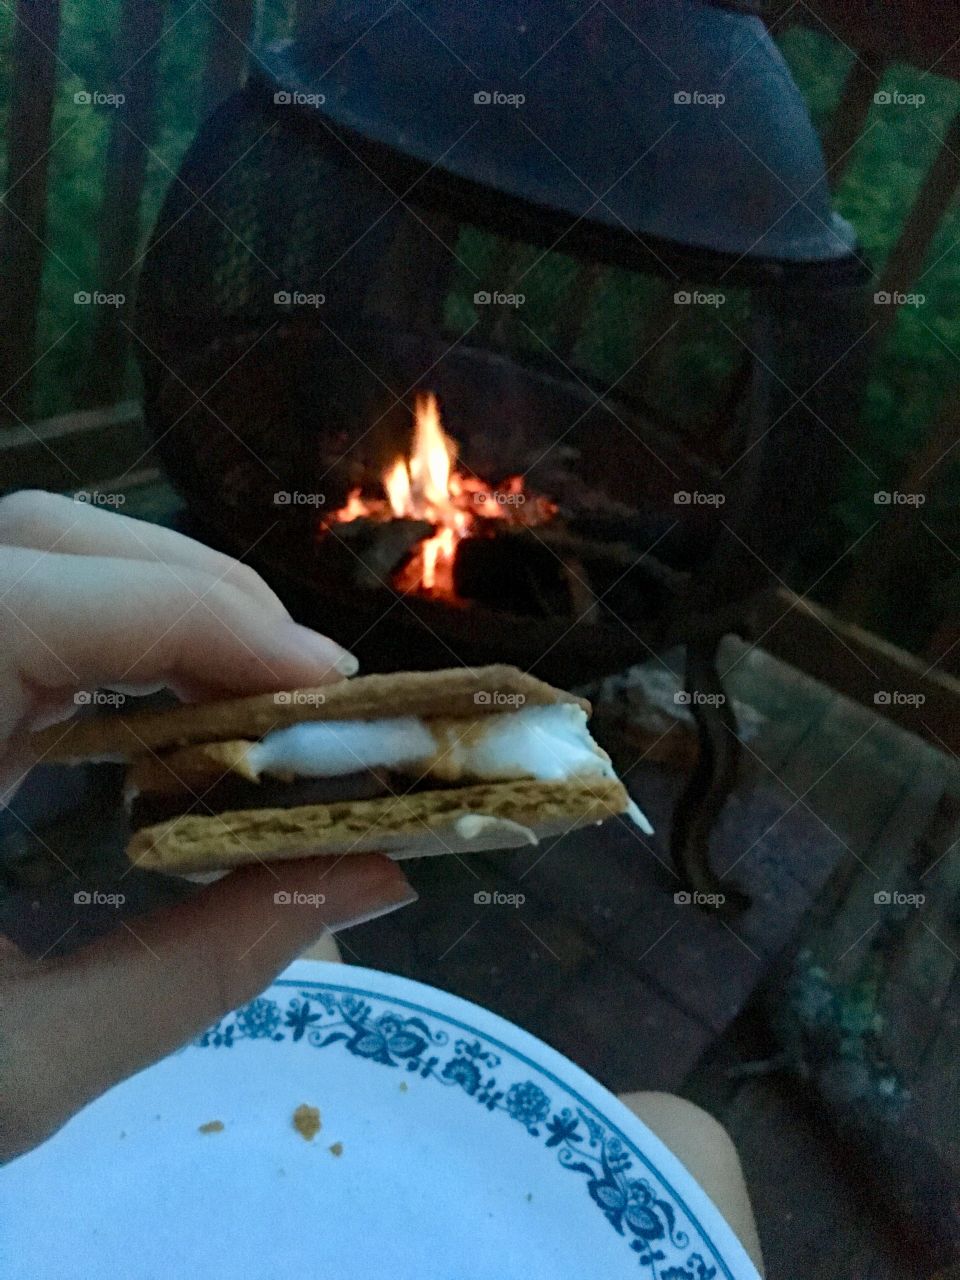 S’more by the fire